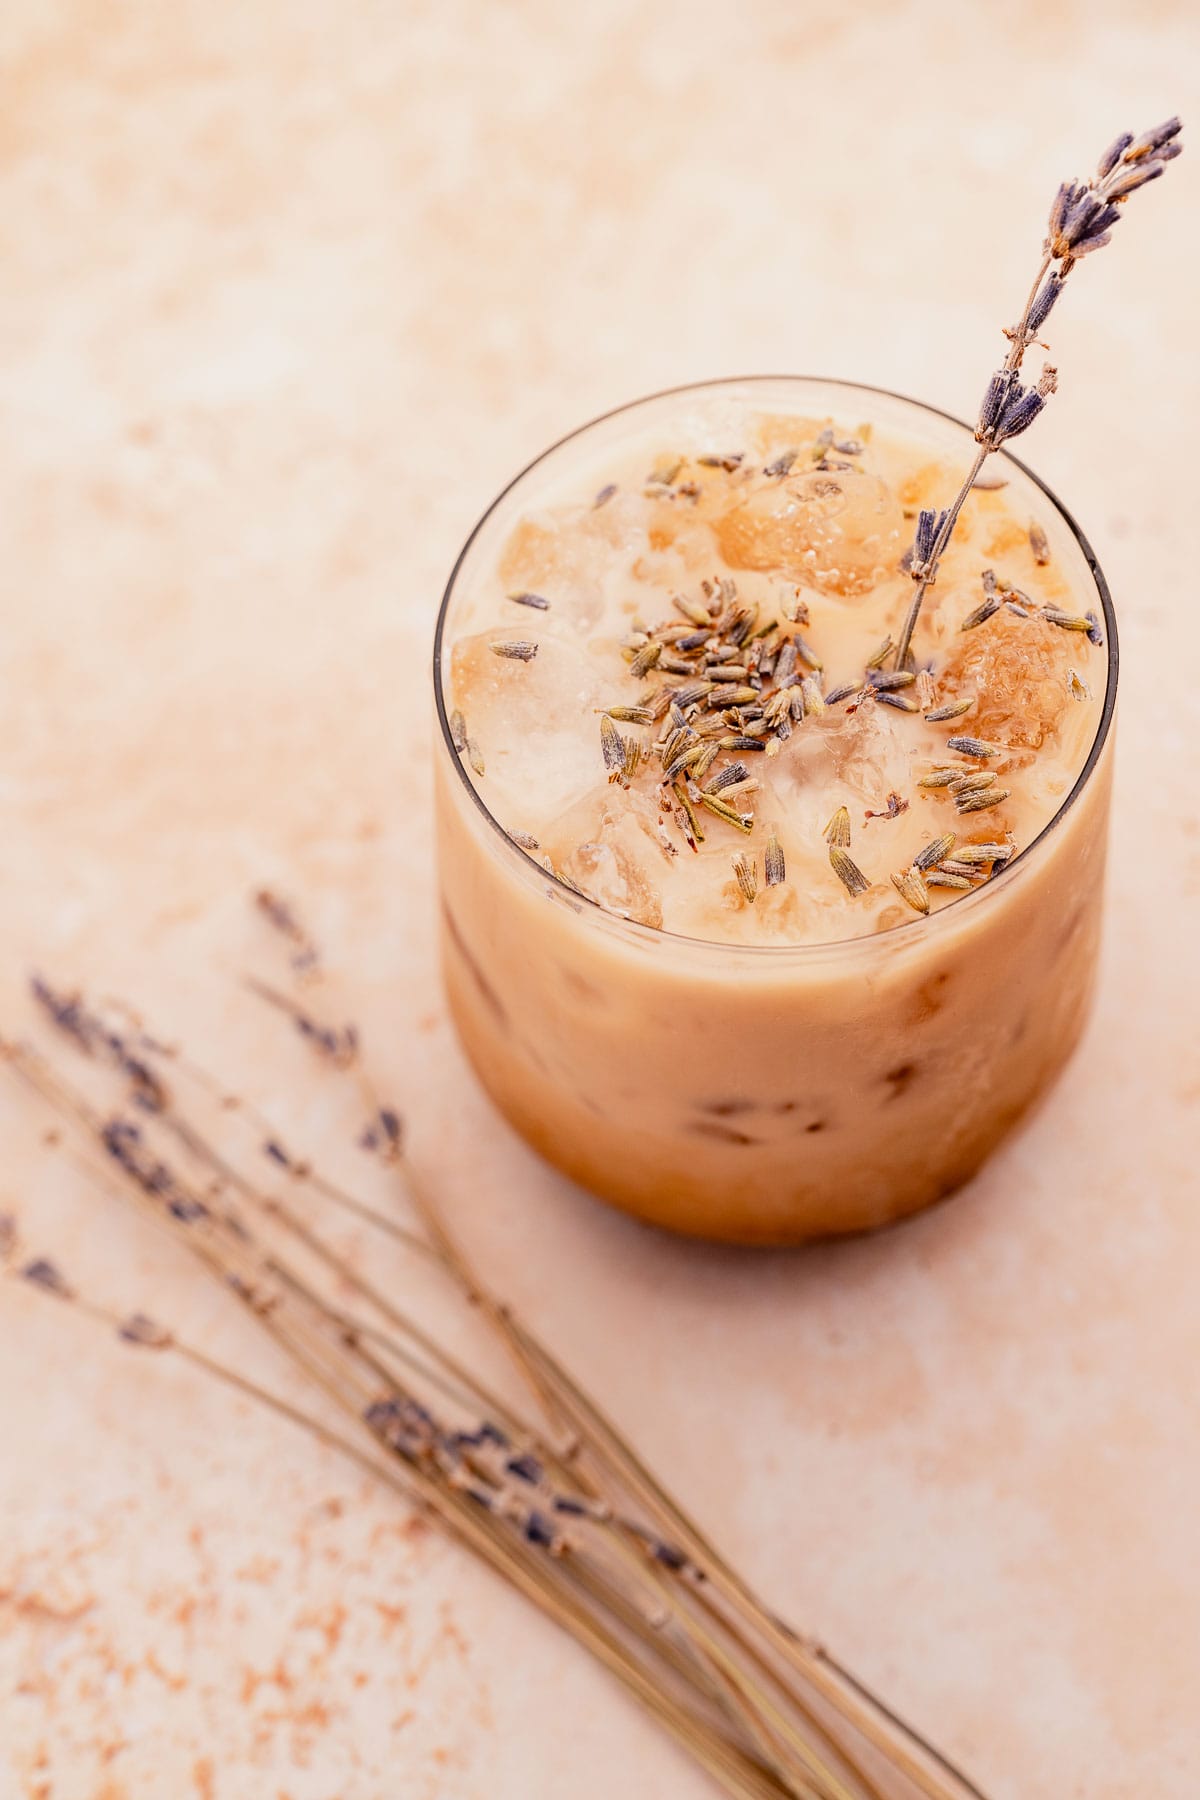 Iced lavender oatmilk latte garnished with lavender sprigs on a marble surface.